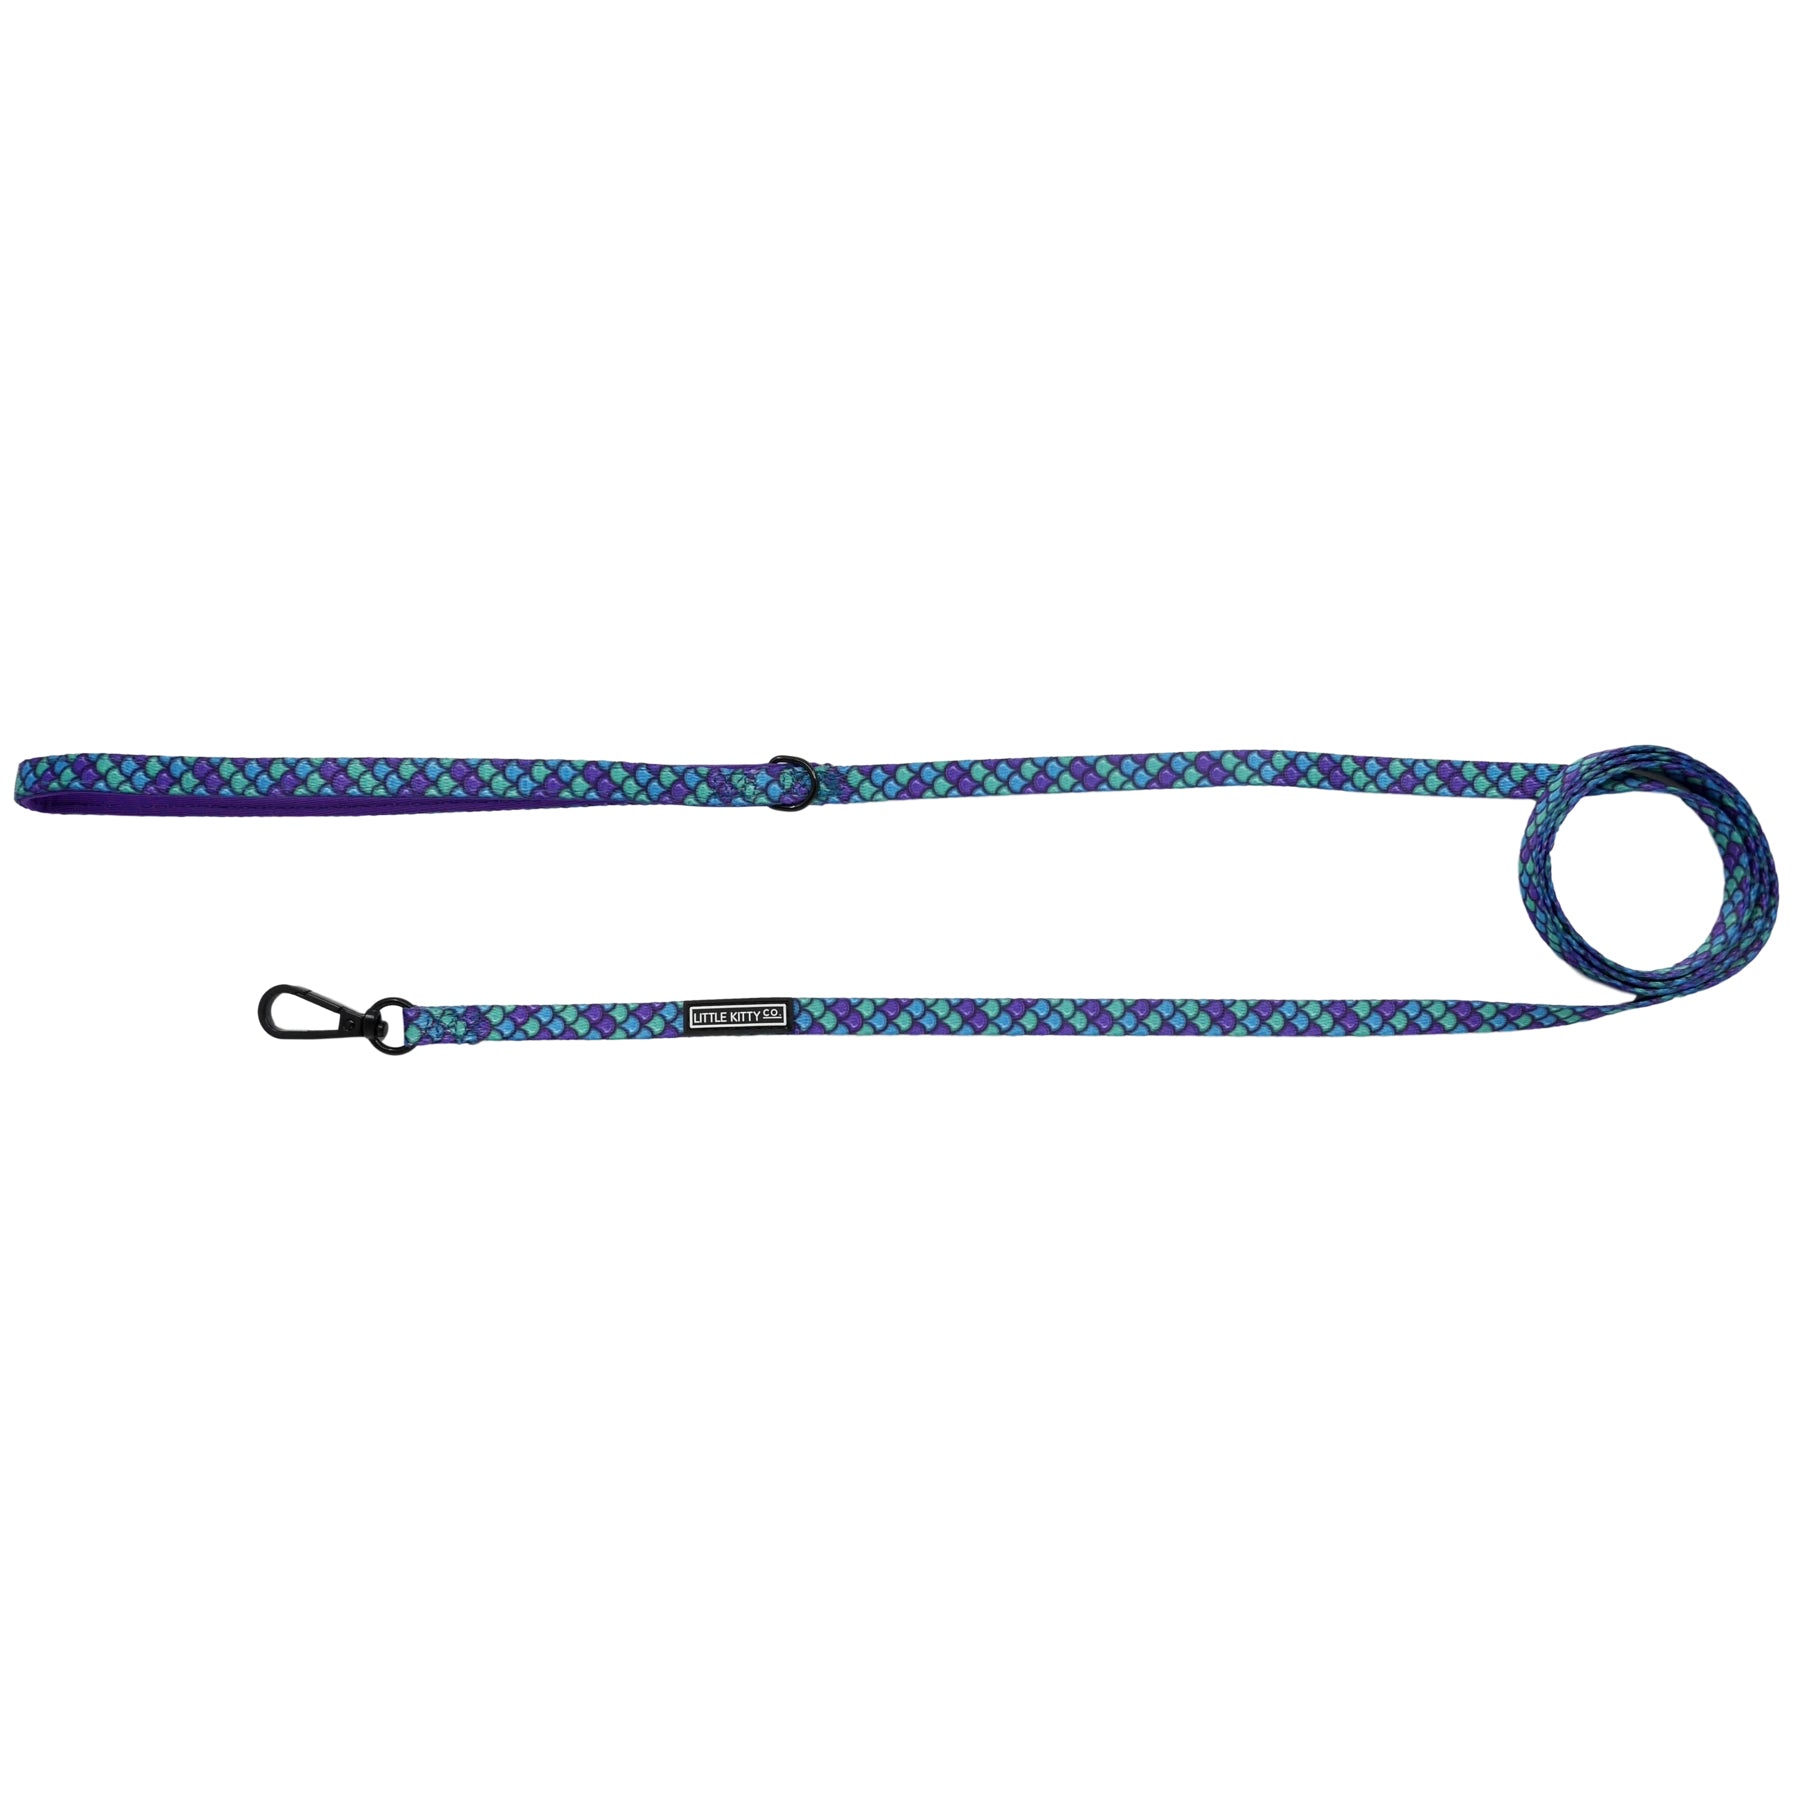 Little Kitty Co. Cat Step-In Harness - Scaled Back (Limited Edition) - A vibrant multi-coloured mermaid themed cat leash in shades of blue, purple, and green.